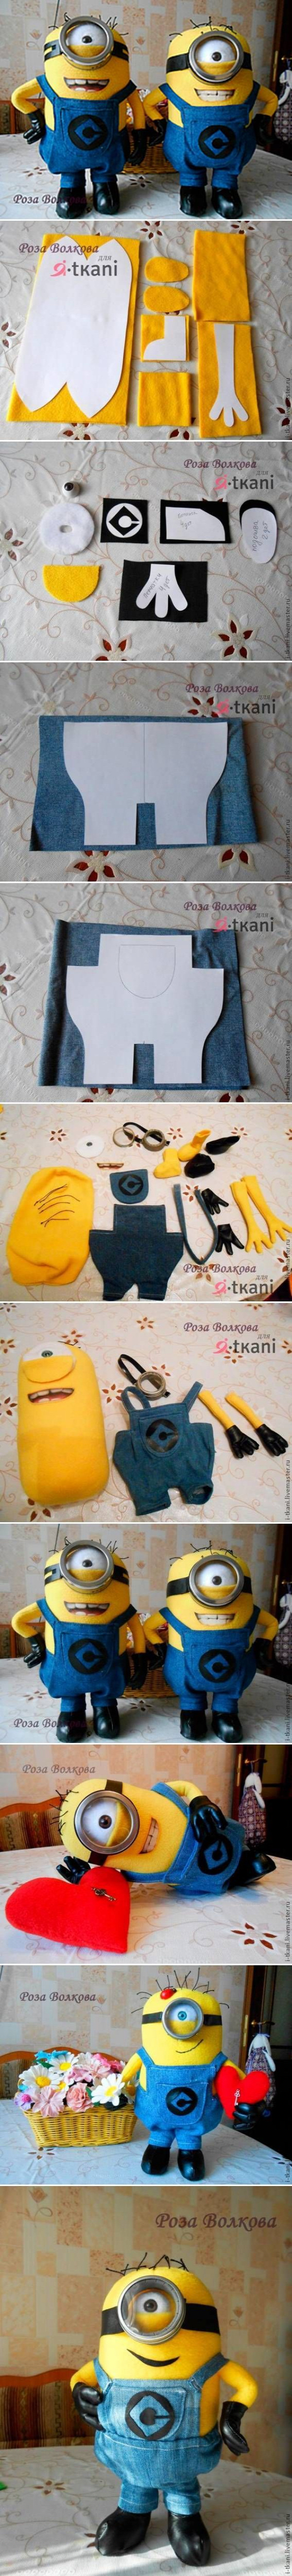 DIY Minion Dolls. I know whose christmas present this will be!